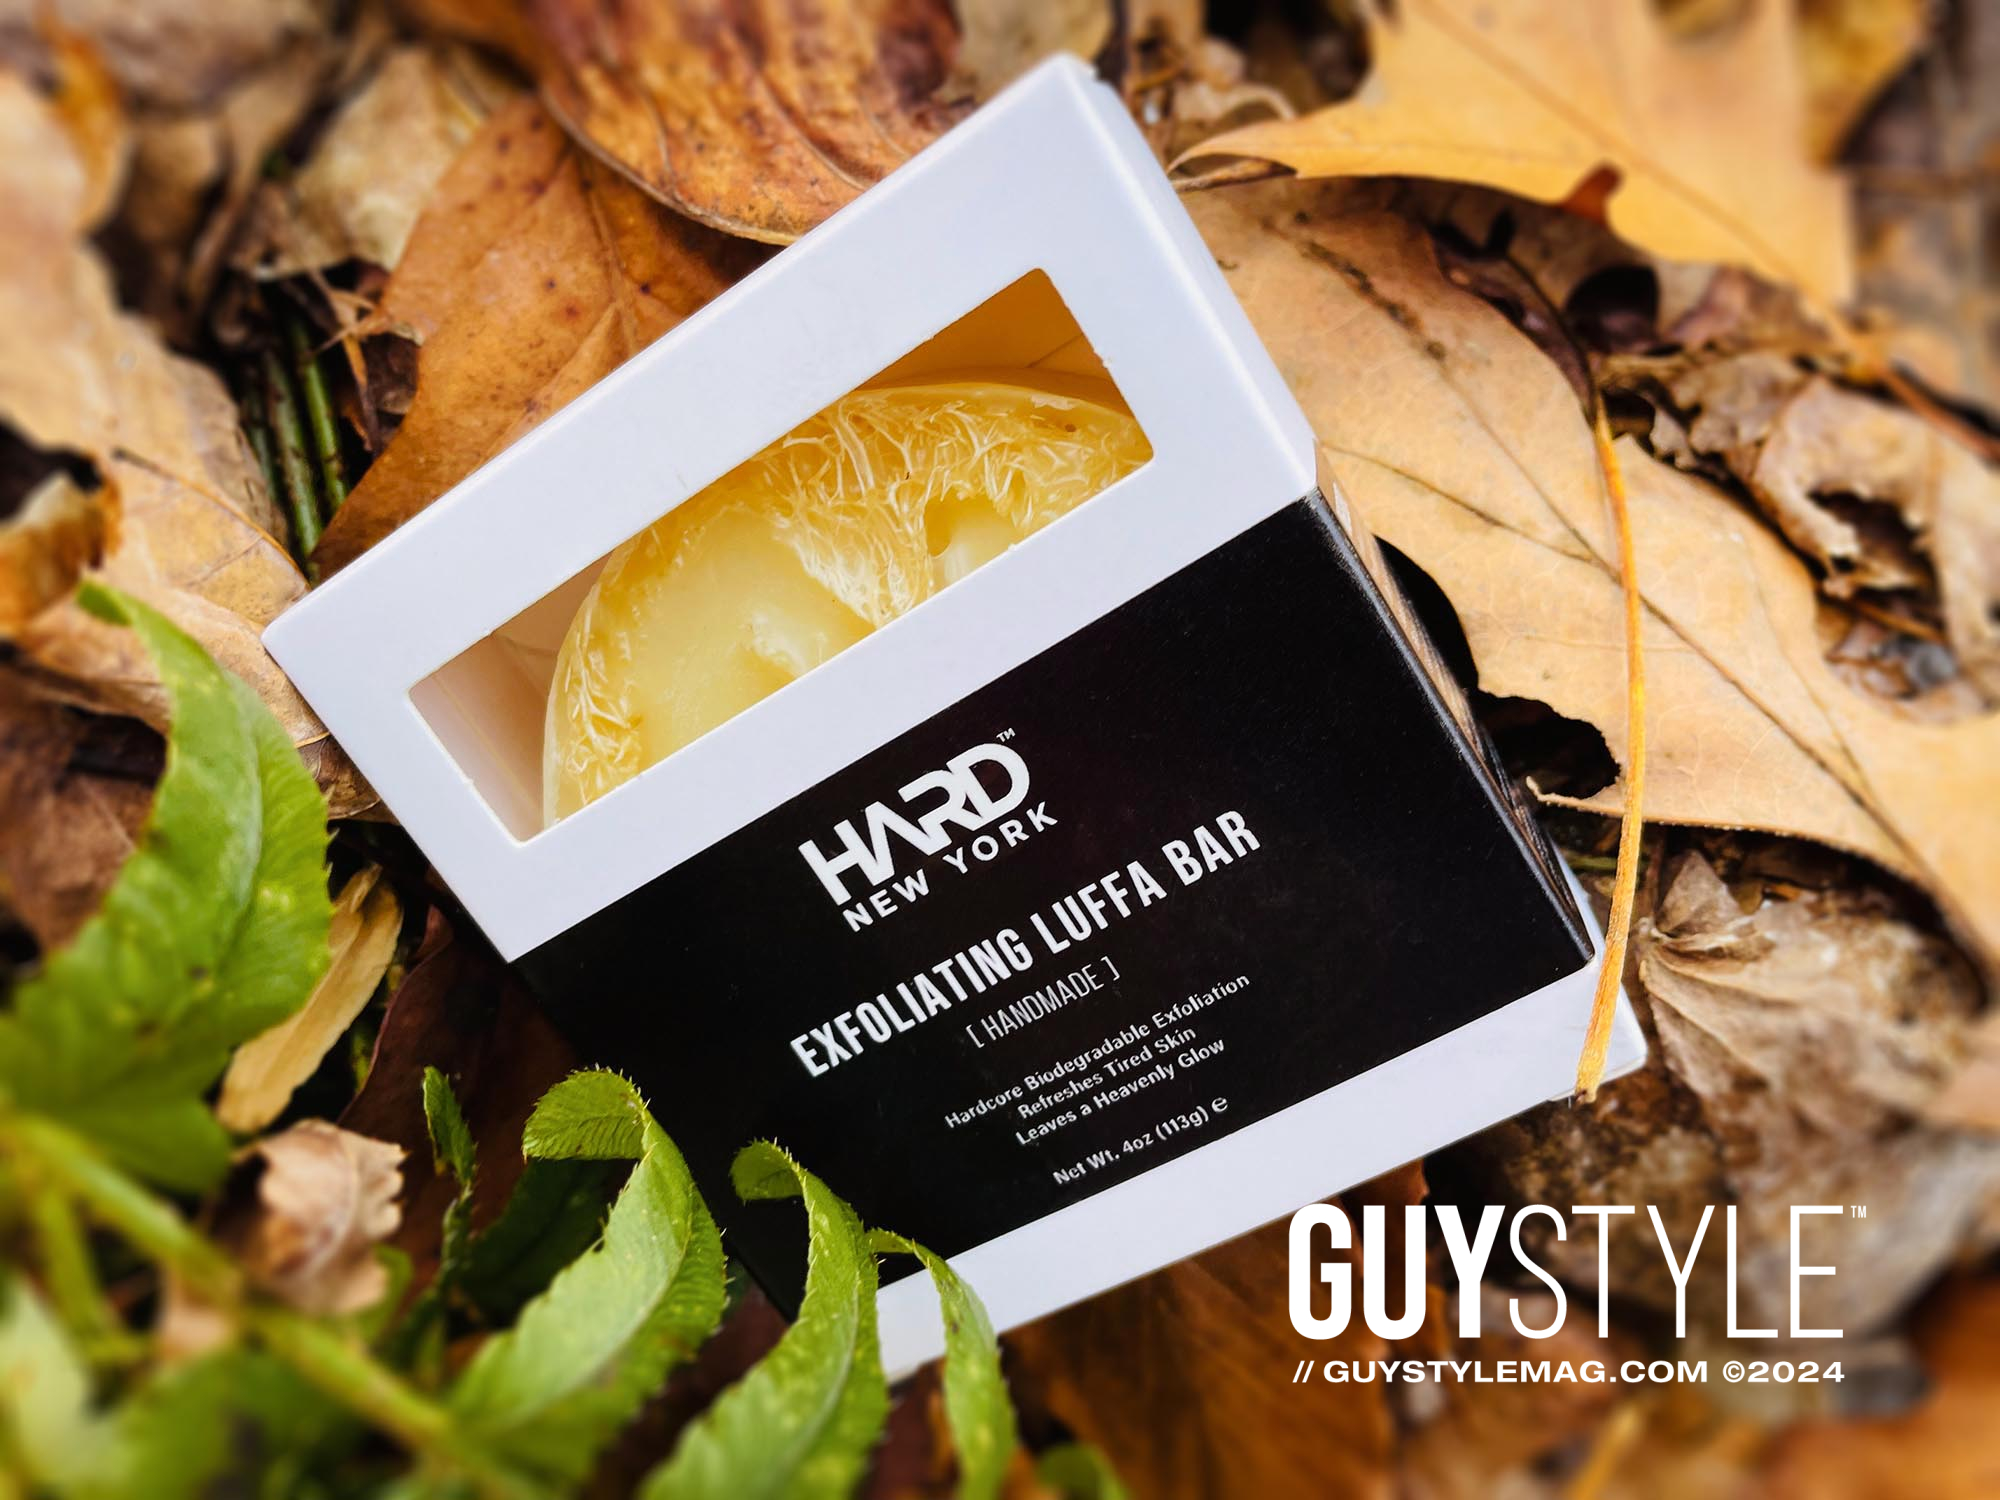 Ditch the Chemicals, Embrace the Earth: Top Natural Soap Bars for Men – Presented by HARD NEW YORK Skincare for Men